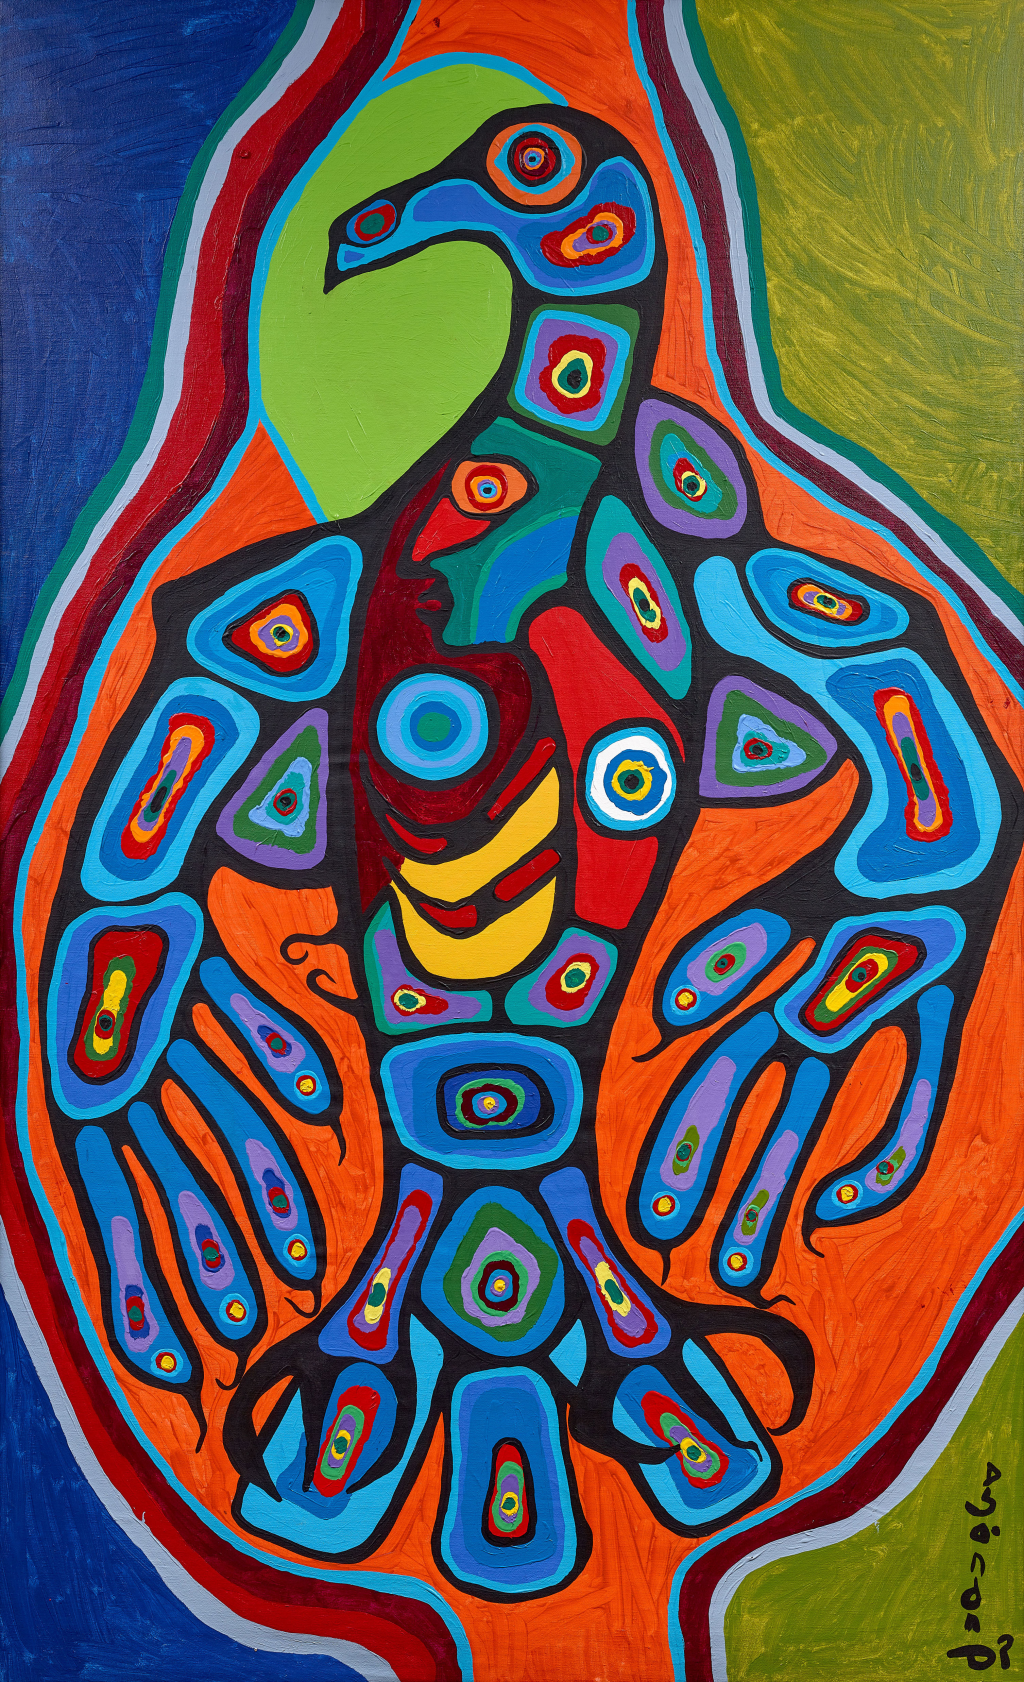 A colorful painting of a mythical thunderbird